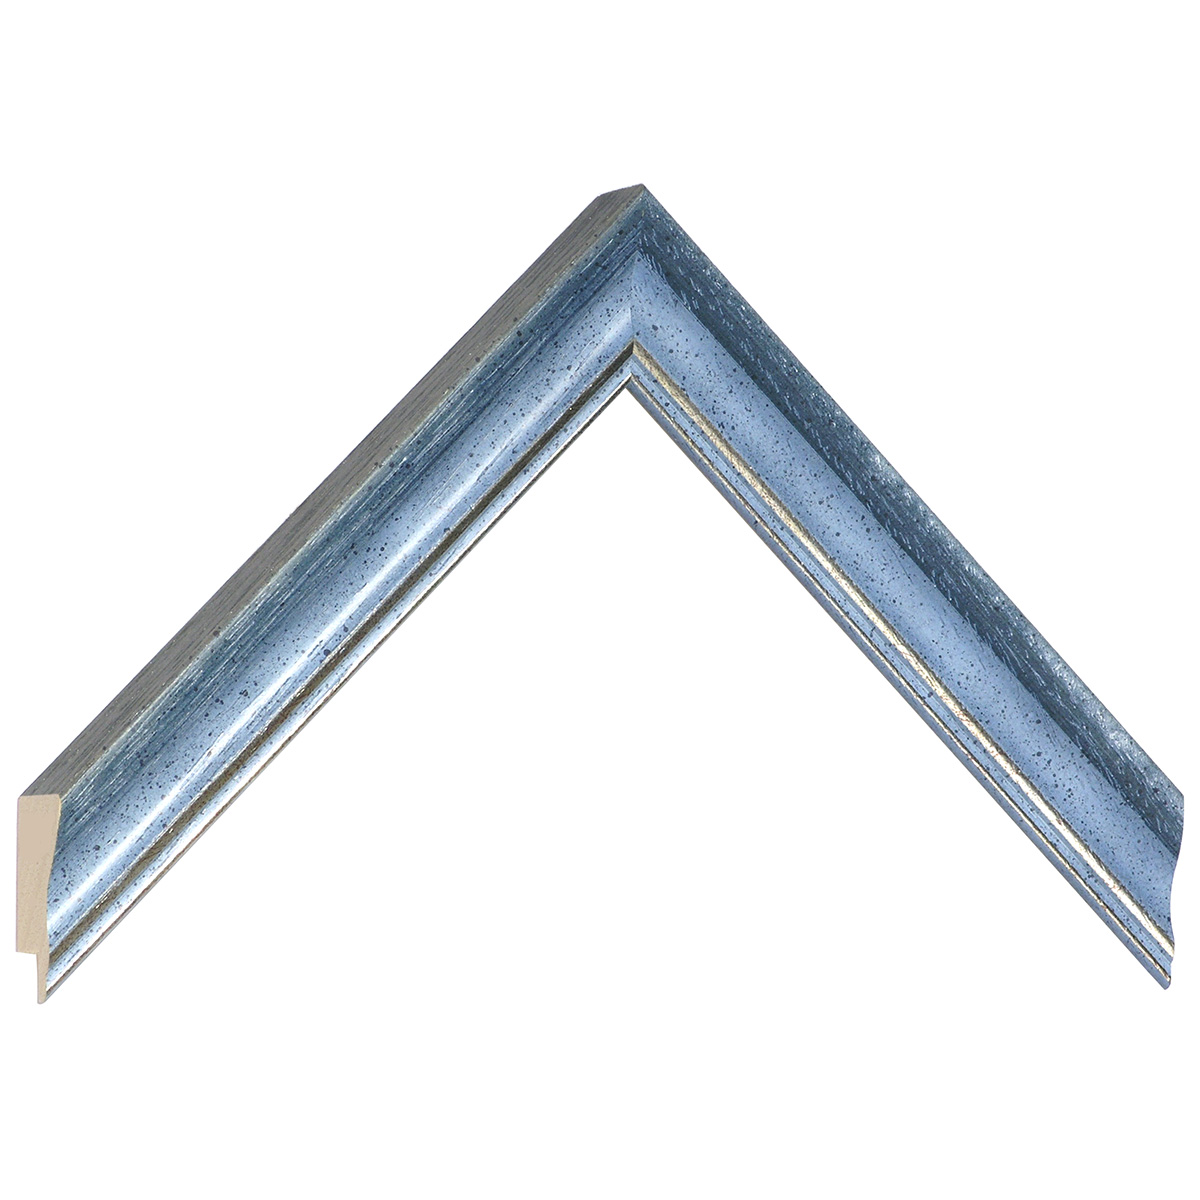 Moulding ayous jointed width 25mm - matt blue with silver fillet - Sample